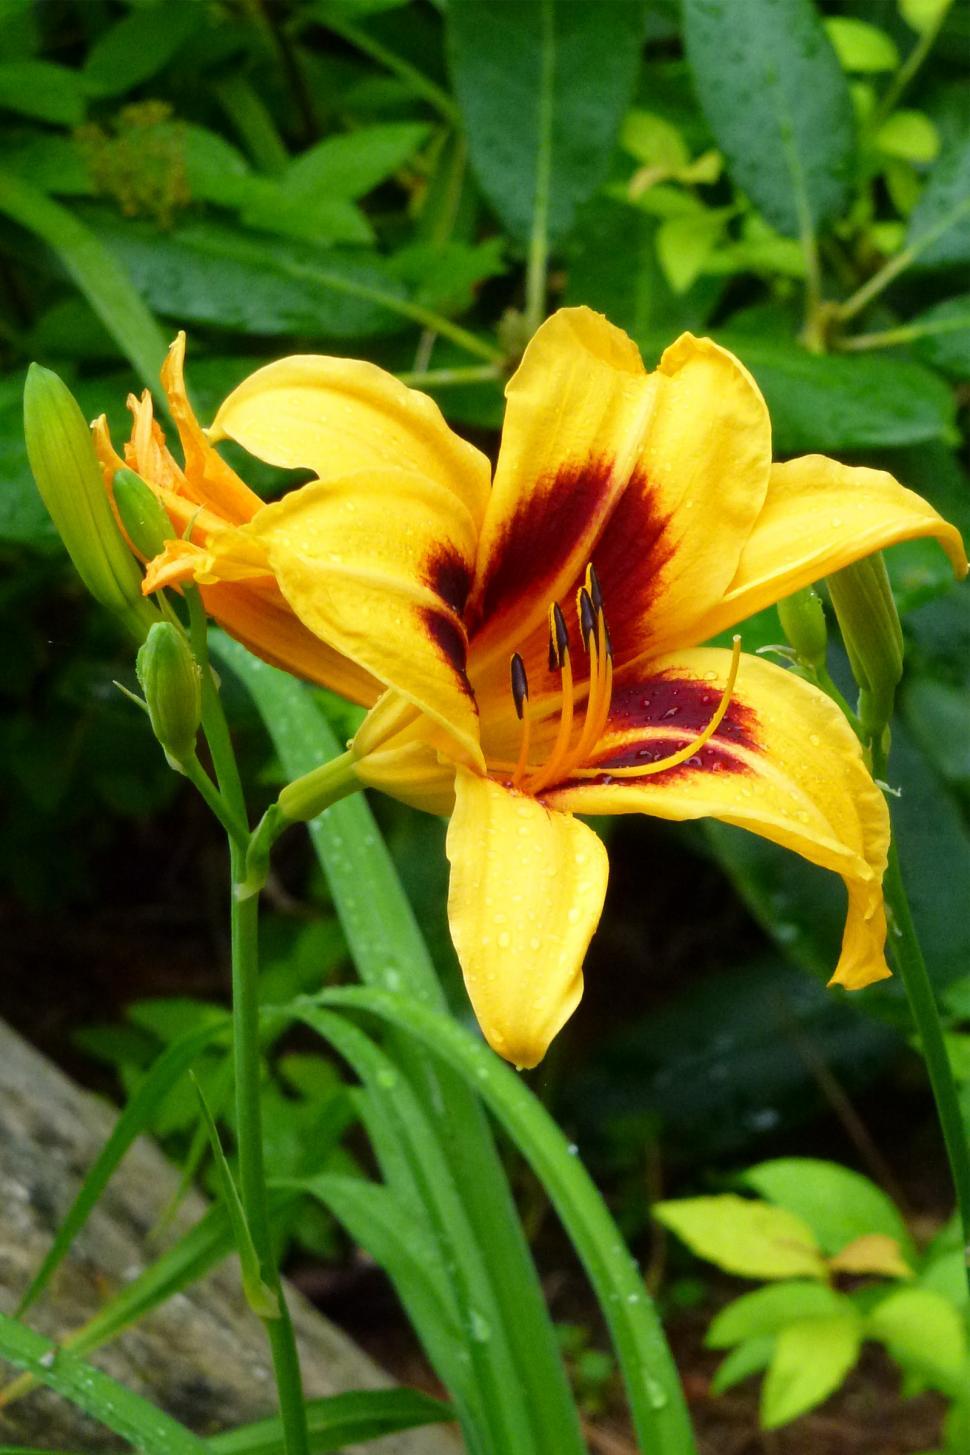 Free Image of Day Lily Flower Blooms 